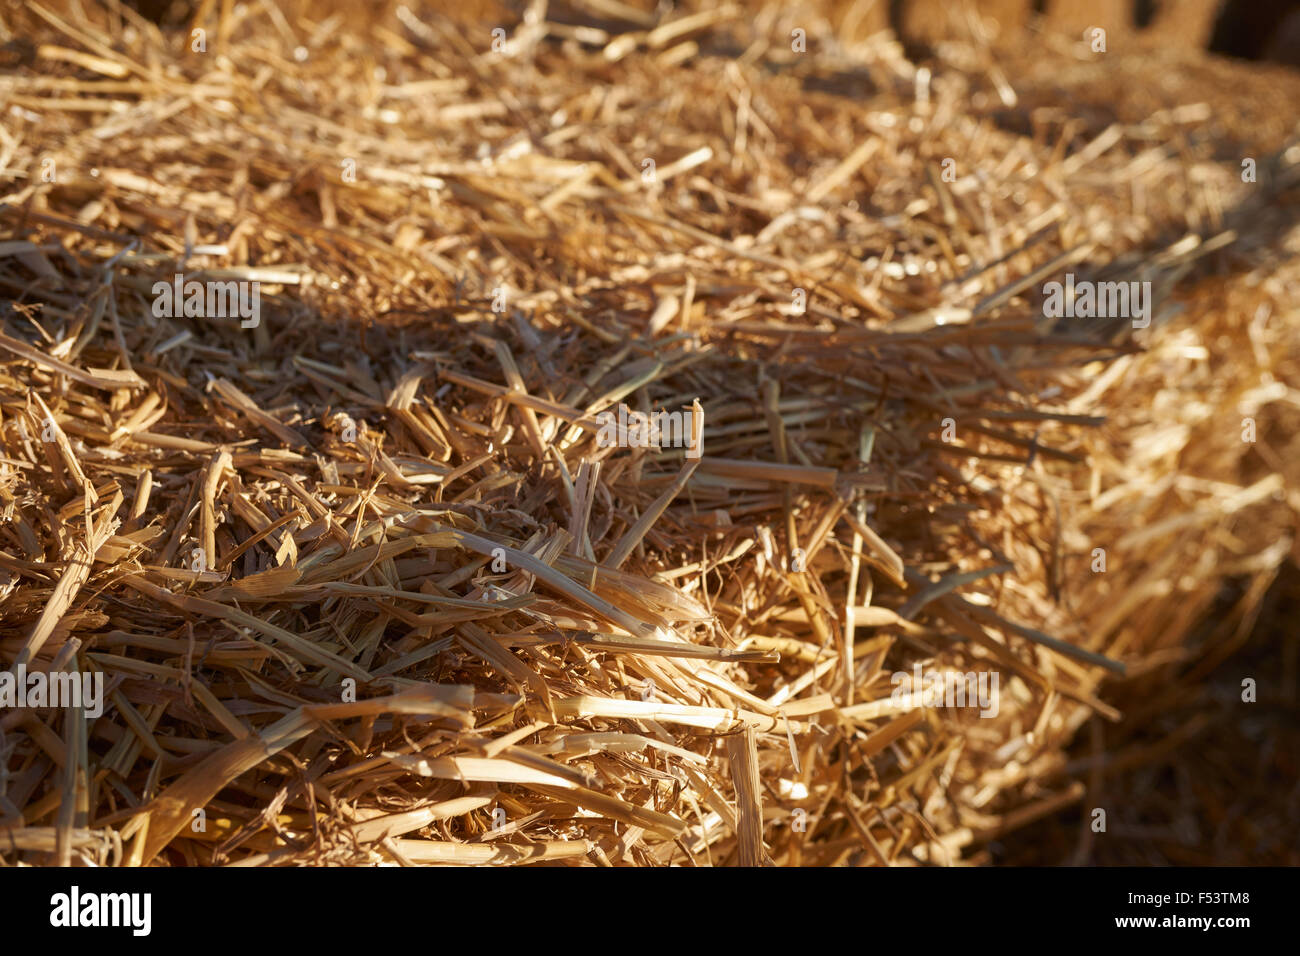 bale of hay detail Stock Photo